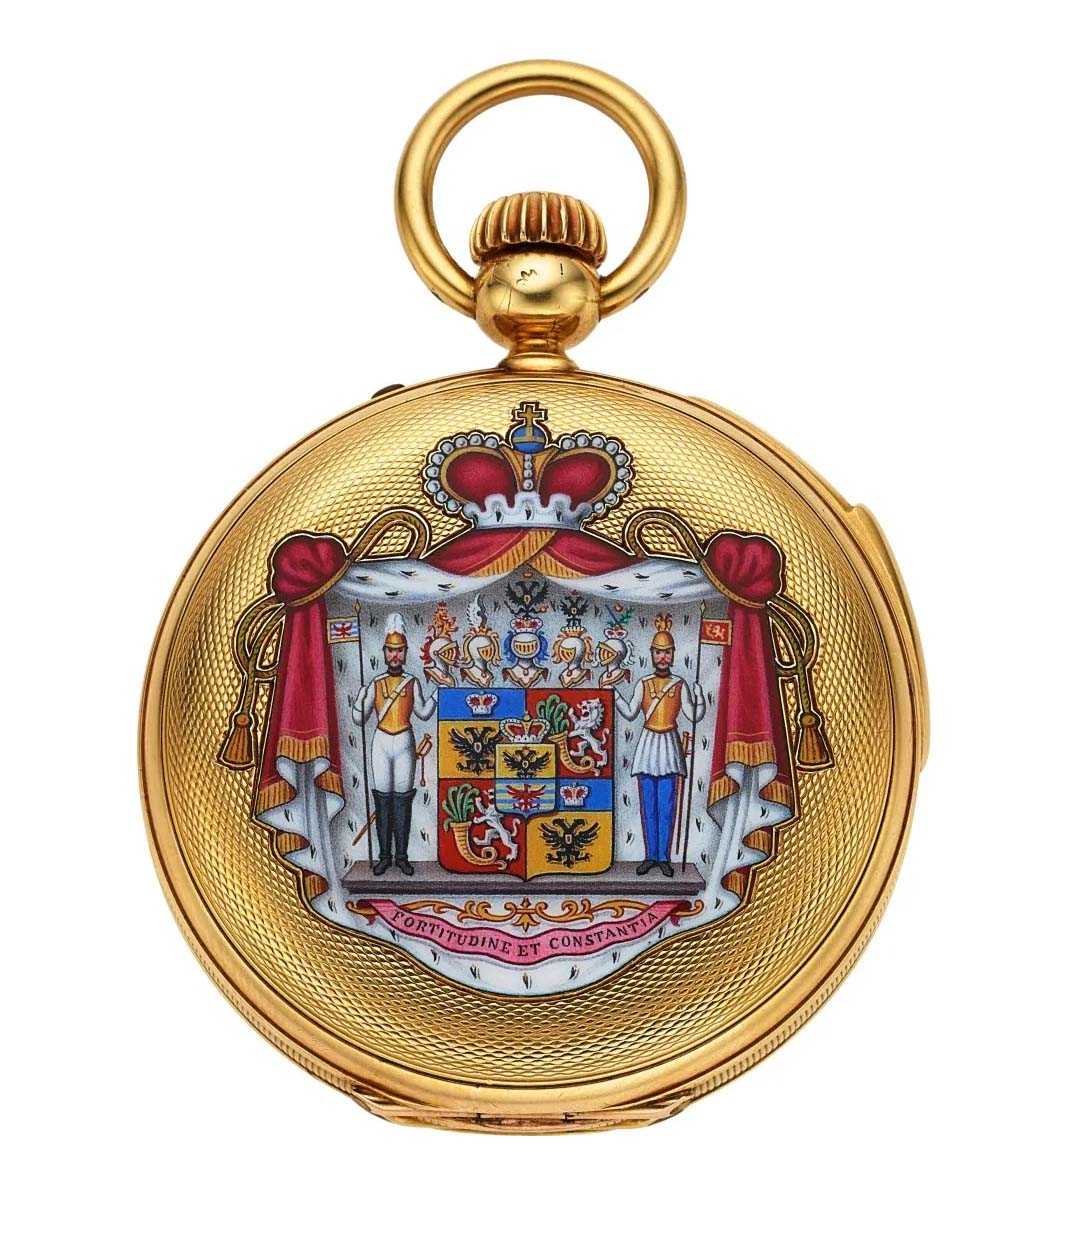 Czapek & Cie gold and enamel quarter-repeating pocket watch For Prince Alexey Fyodorovich Orlov of Imperial Russia, estimated at $6,500-$1M at Heritage.